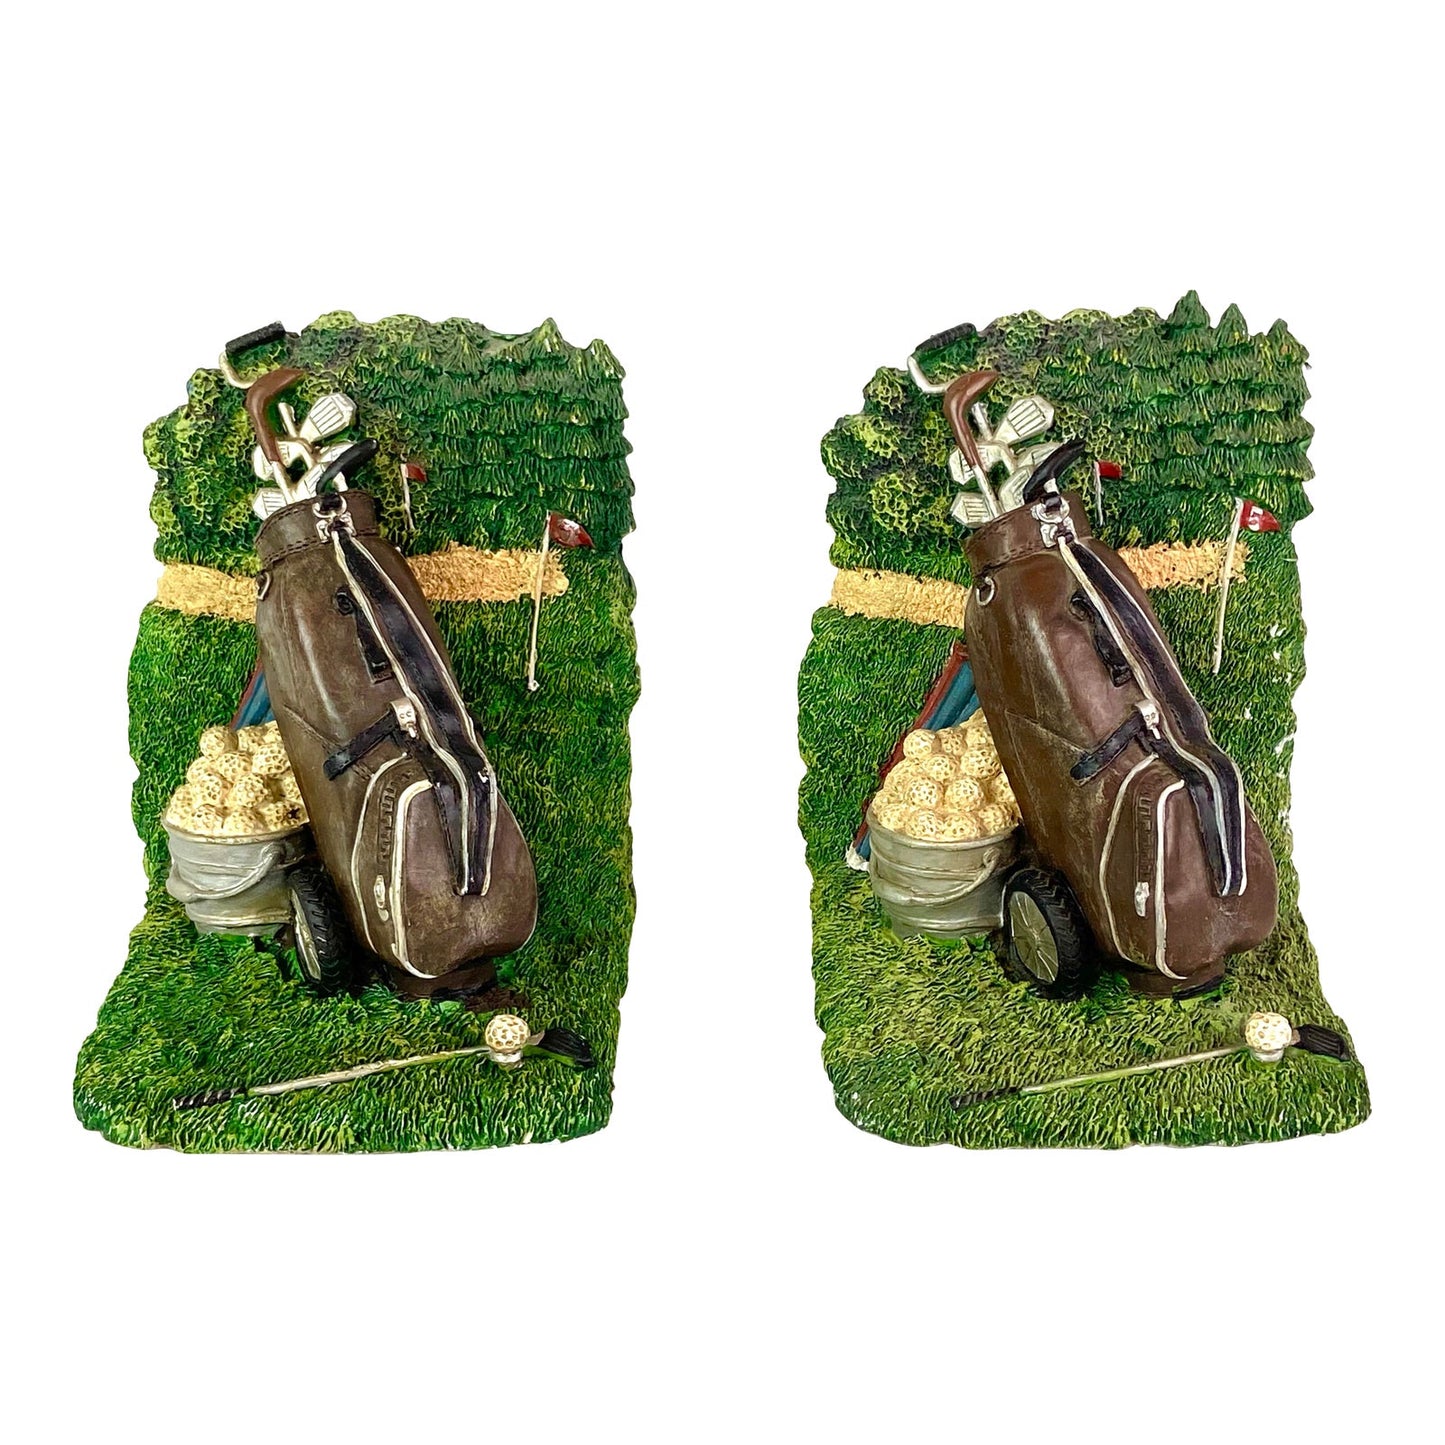 [SOLD] Golf Sports Green Ceramic Bookends - Pair of 2